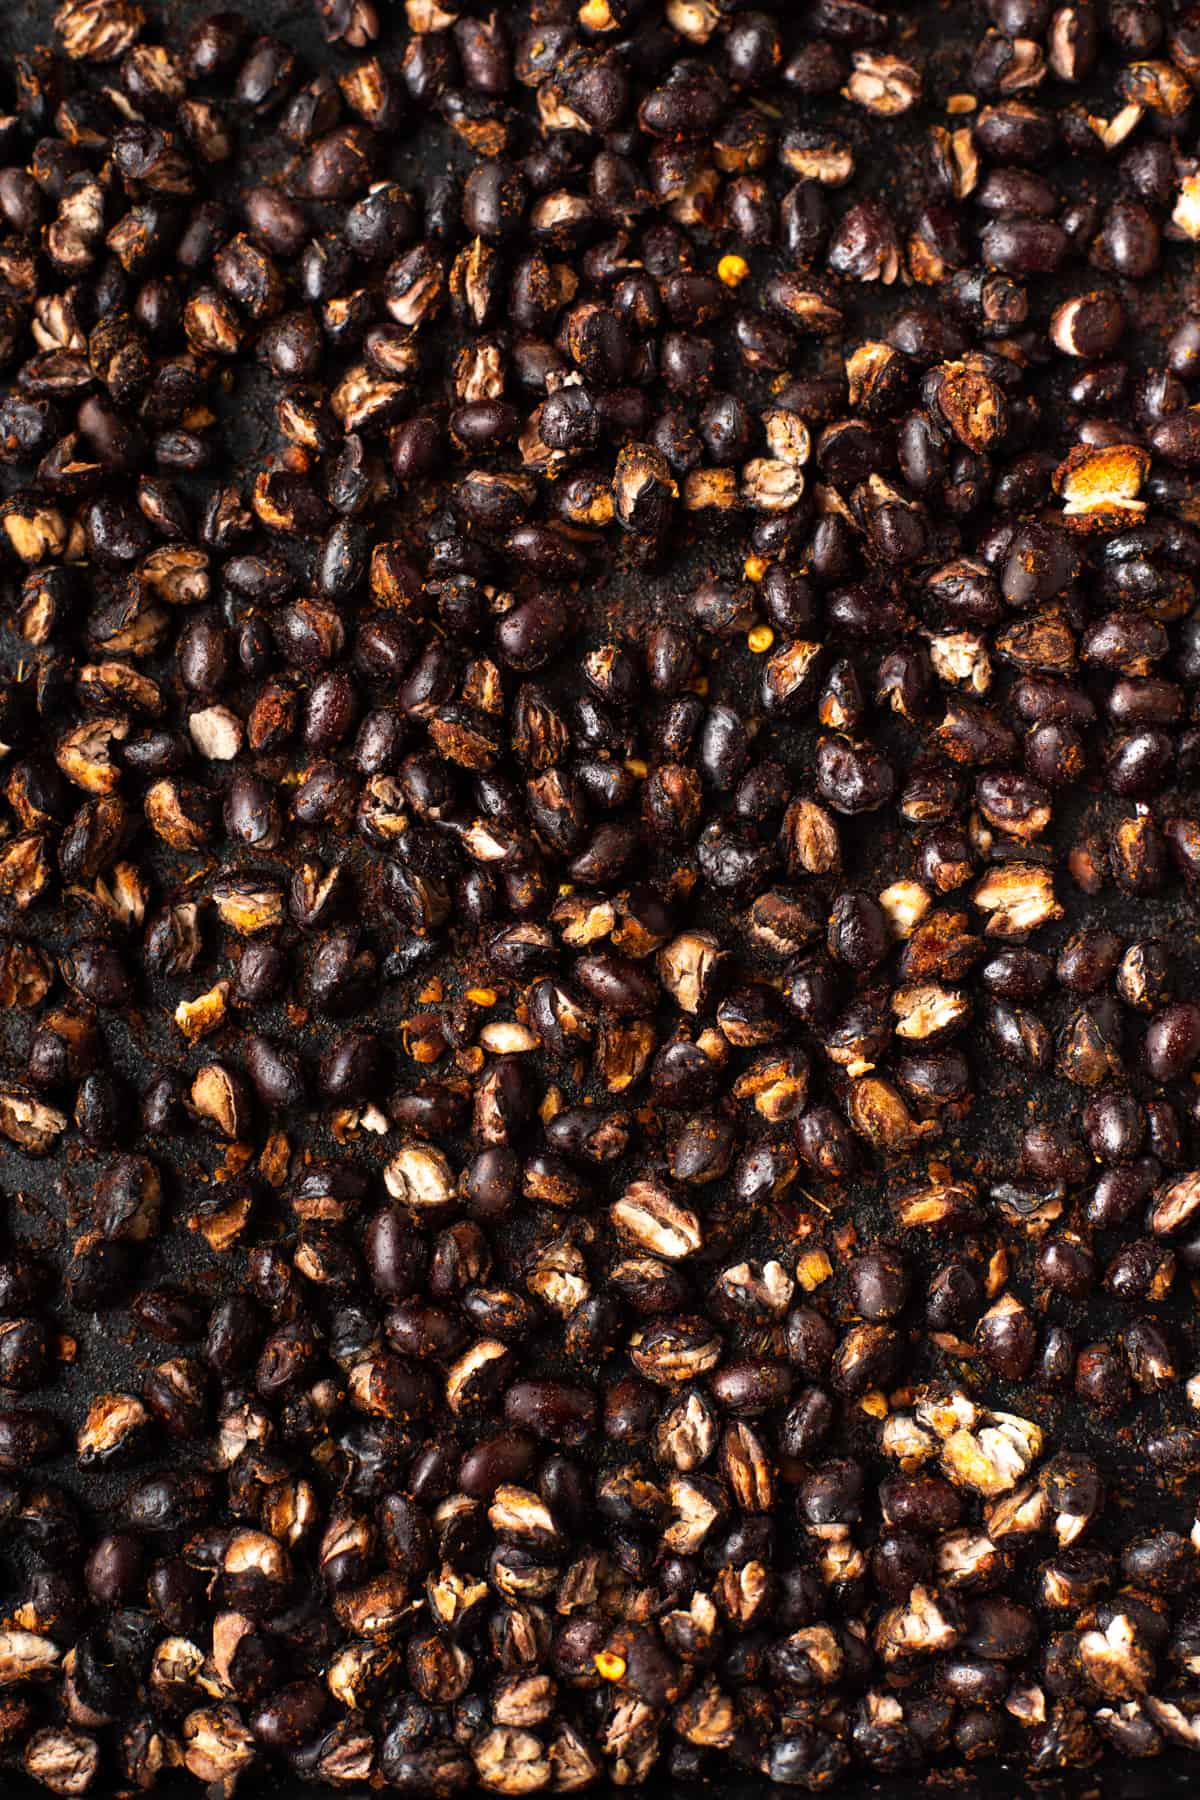 Close-up photo of crispy roasted black beans with some split skins.